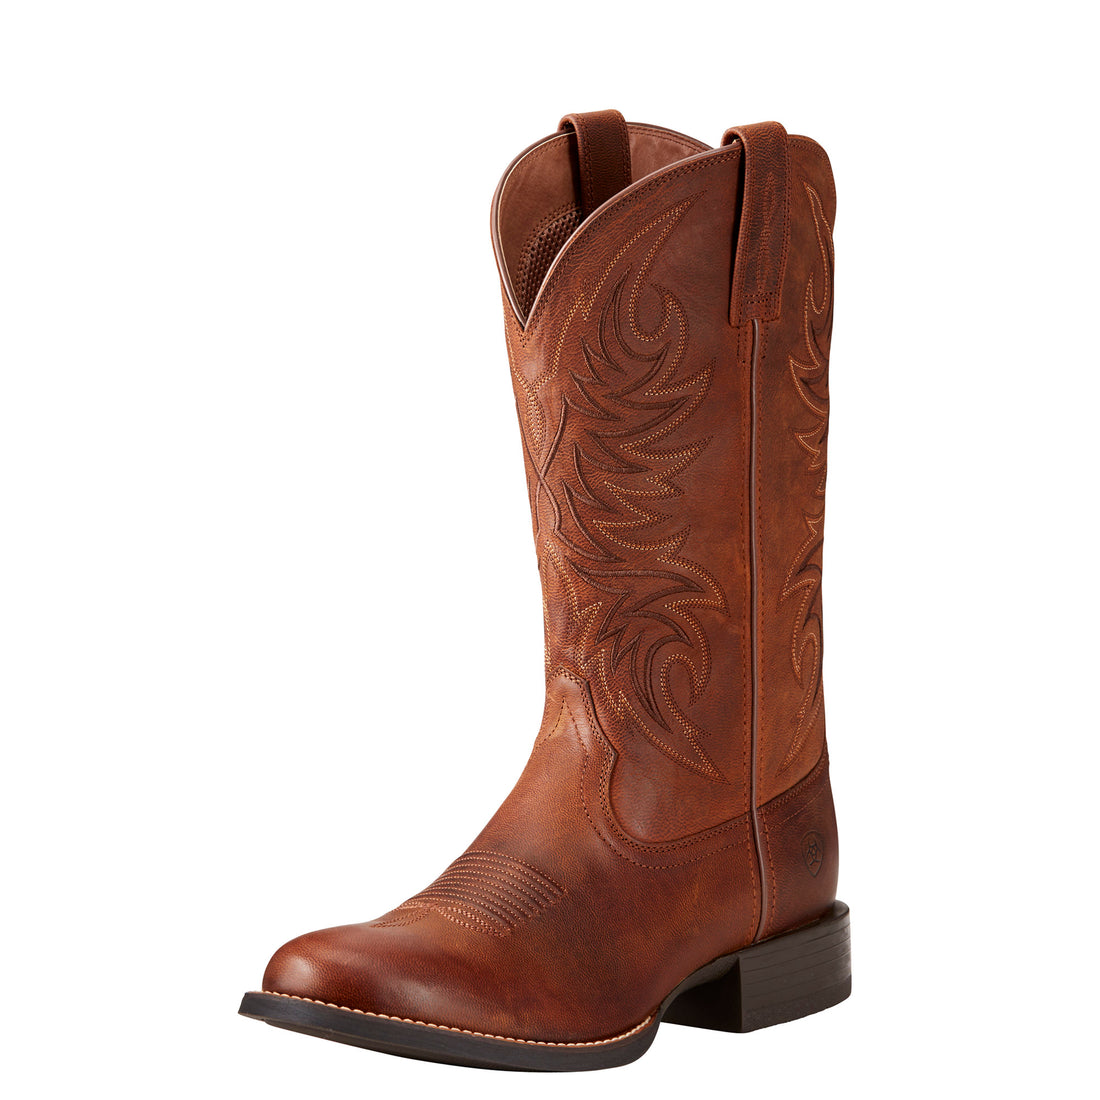 Ariat Wythburn H2O Insulated Boots